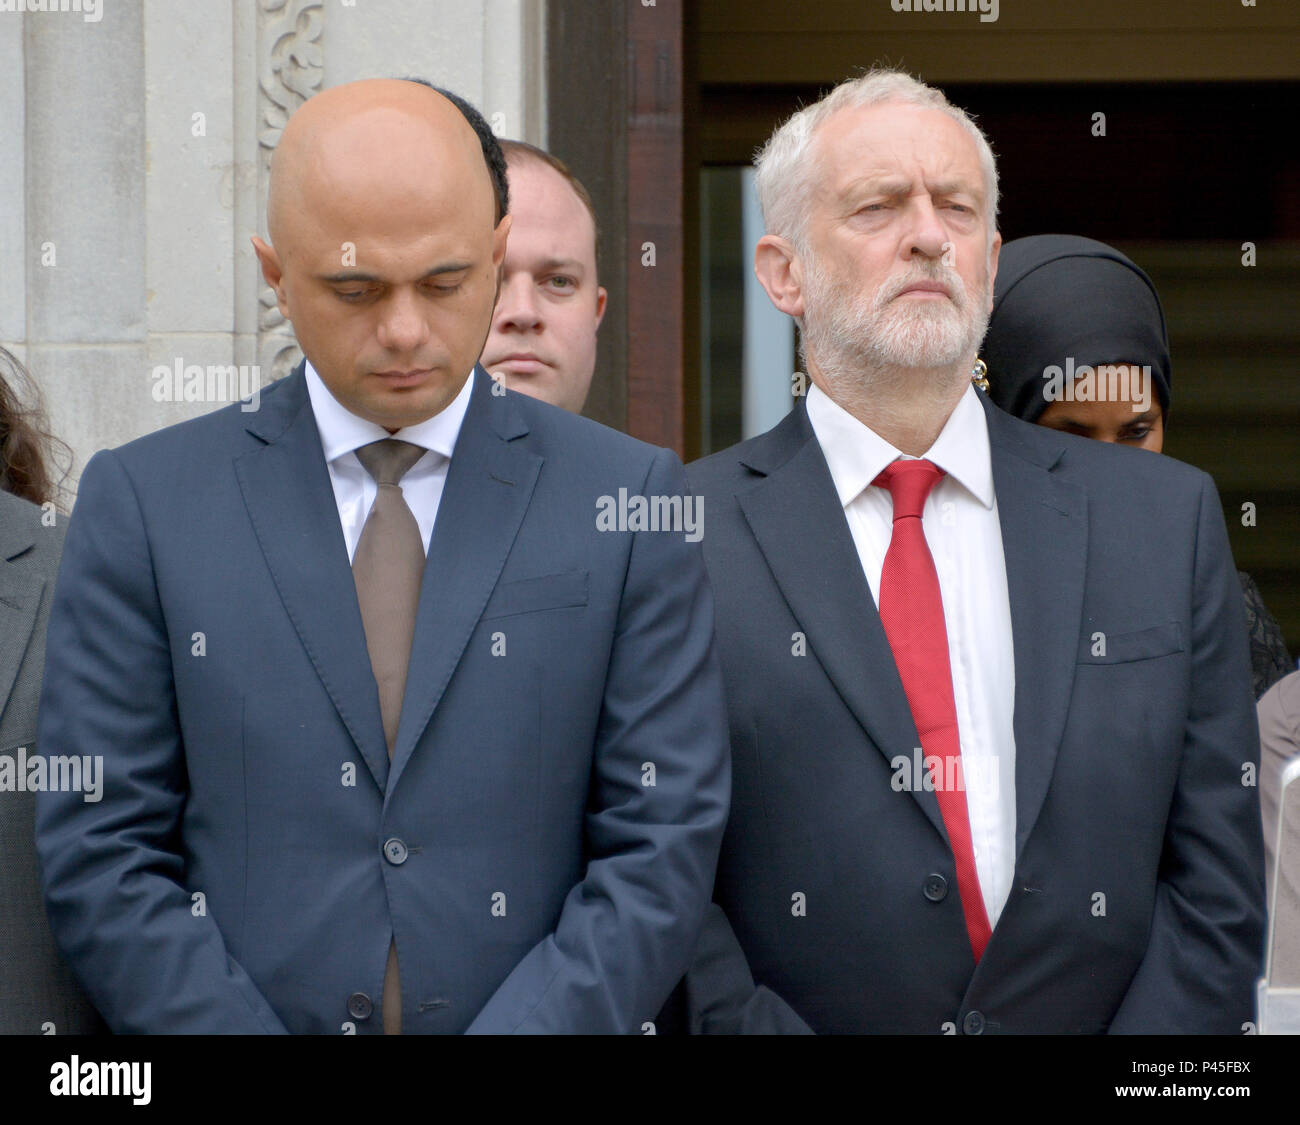 Photo Must Be Credited ©Alpha Press 066465 19/06/2018 Sajid Javid and Jeremy Corbyn at the Finsbury Park Terrorist Attack 1st Anniversary Minutes Silence held at Islington Town Hall in London. Stock Photo